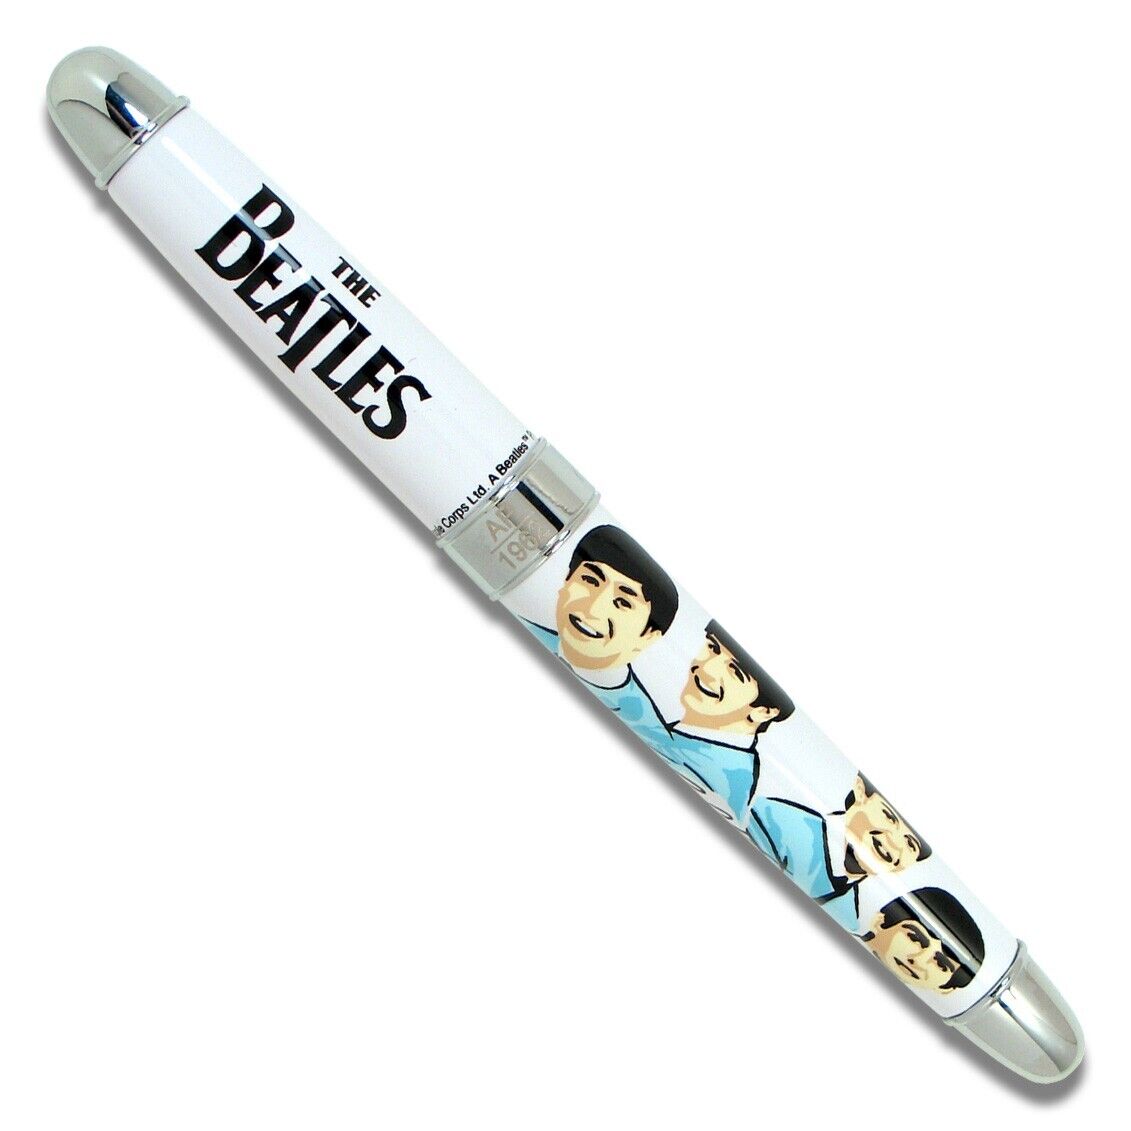 THE BEATLES - ACME STUDIO - 1962 LIMITED EDITION - PEN W/EXCLUSIVE BOX #0100 NEW